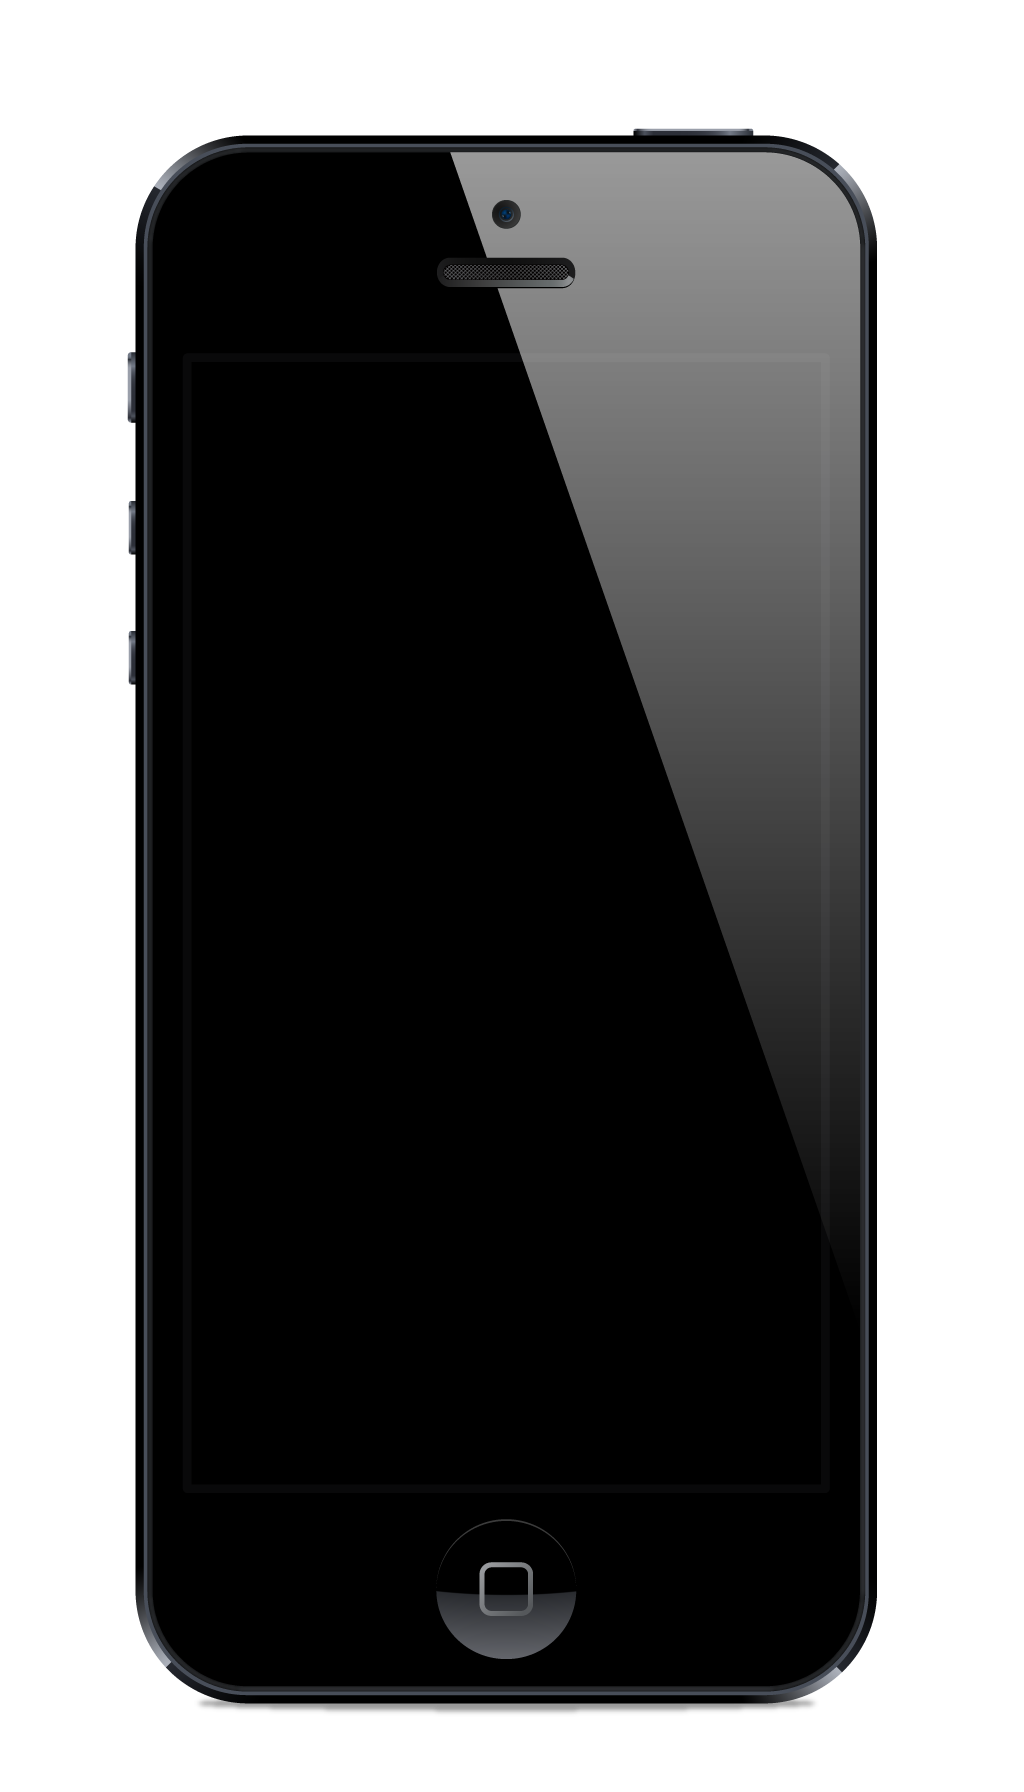 Iphone 5 Vector Png